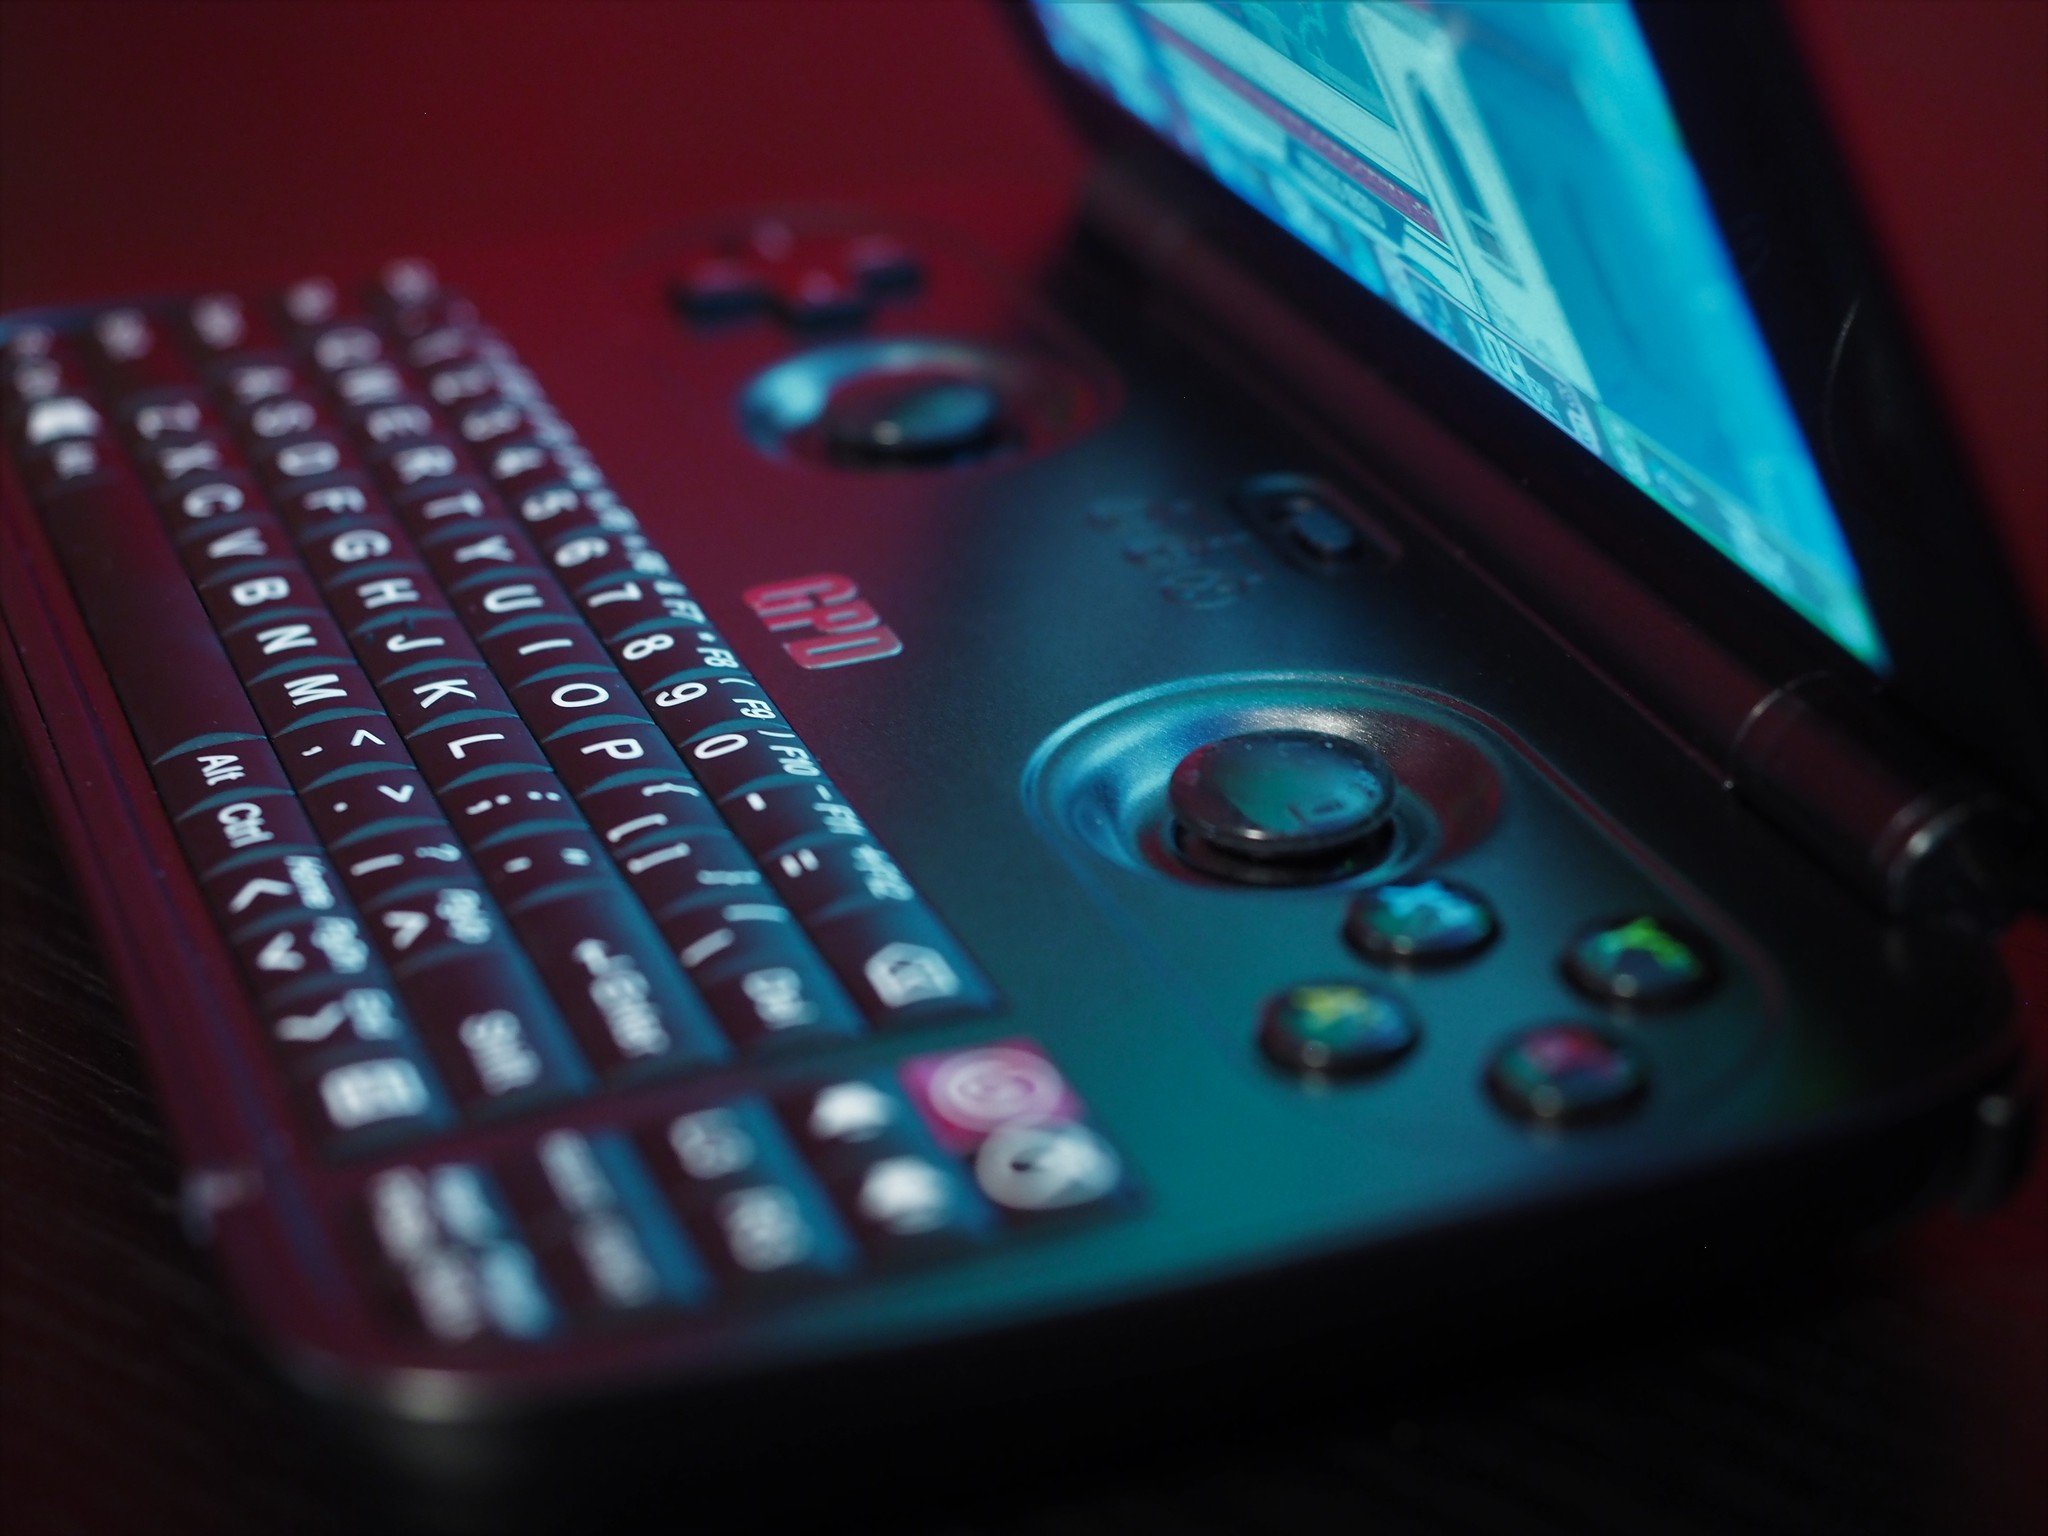 GPD Win review: A pint-sized gaming PC that touts the power of Windows